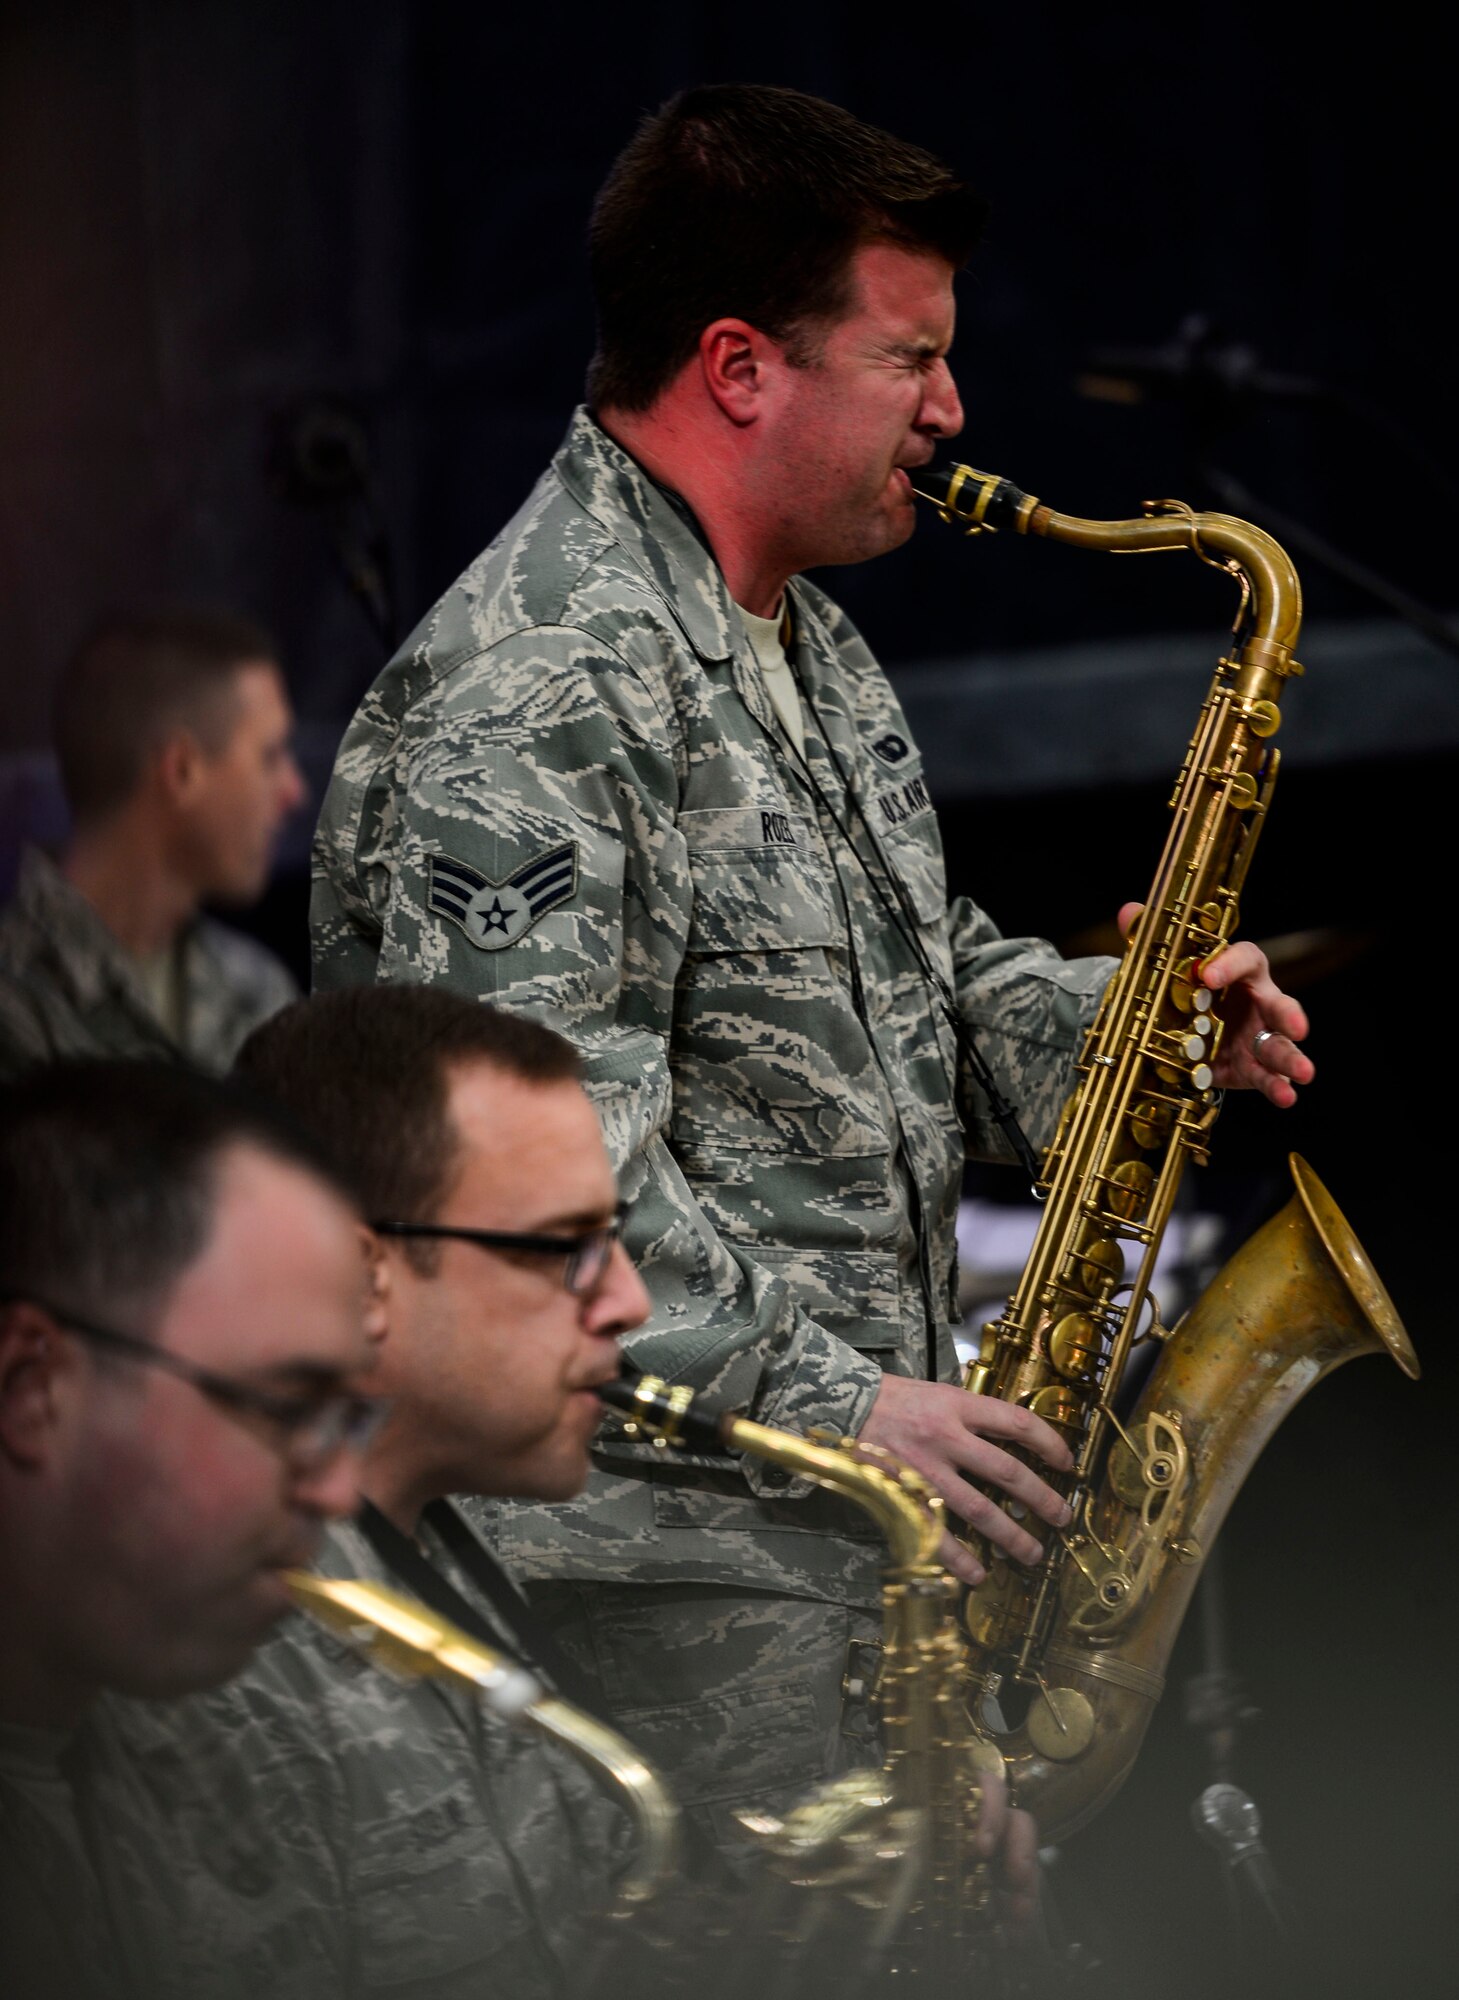 U.S. Air Force Senior Airman Stephen Rozek, U.S. Air Force Heritage of America Band musician, performs alongside the HOAB “Rhythm in Blue” jazz ensemble during a good-will tour for Harry Connick Jr., musician, actor and “American Idol” judge, and his band at Langley Air Force Base, Va., Feb. 23, 2015. After the ensemble’s performance, Connick Jr. and his band played, then shared their experiences as touring musicians. (U.S. Air Force photo by Senior Airman Kayla Newman/Released)